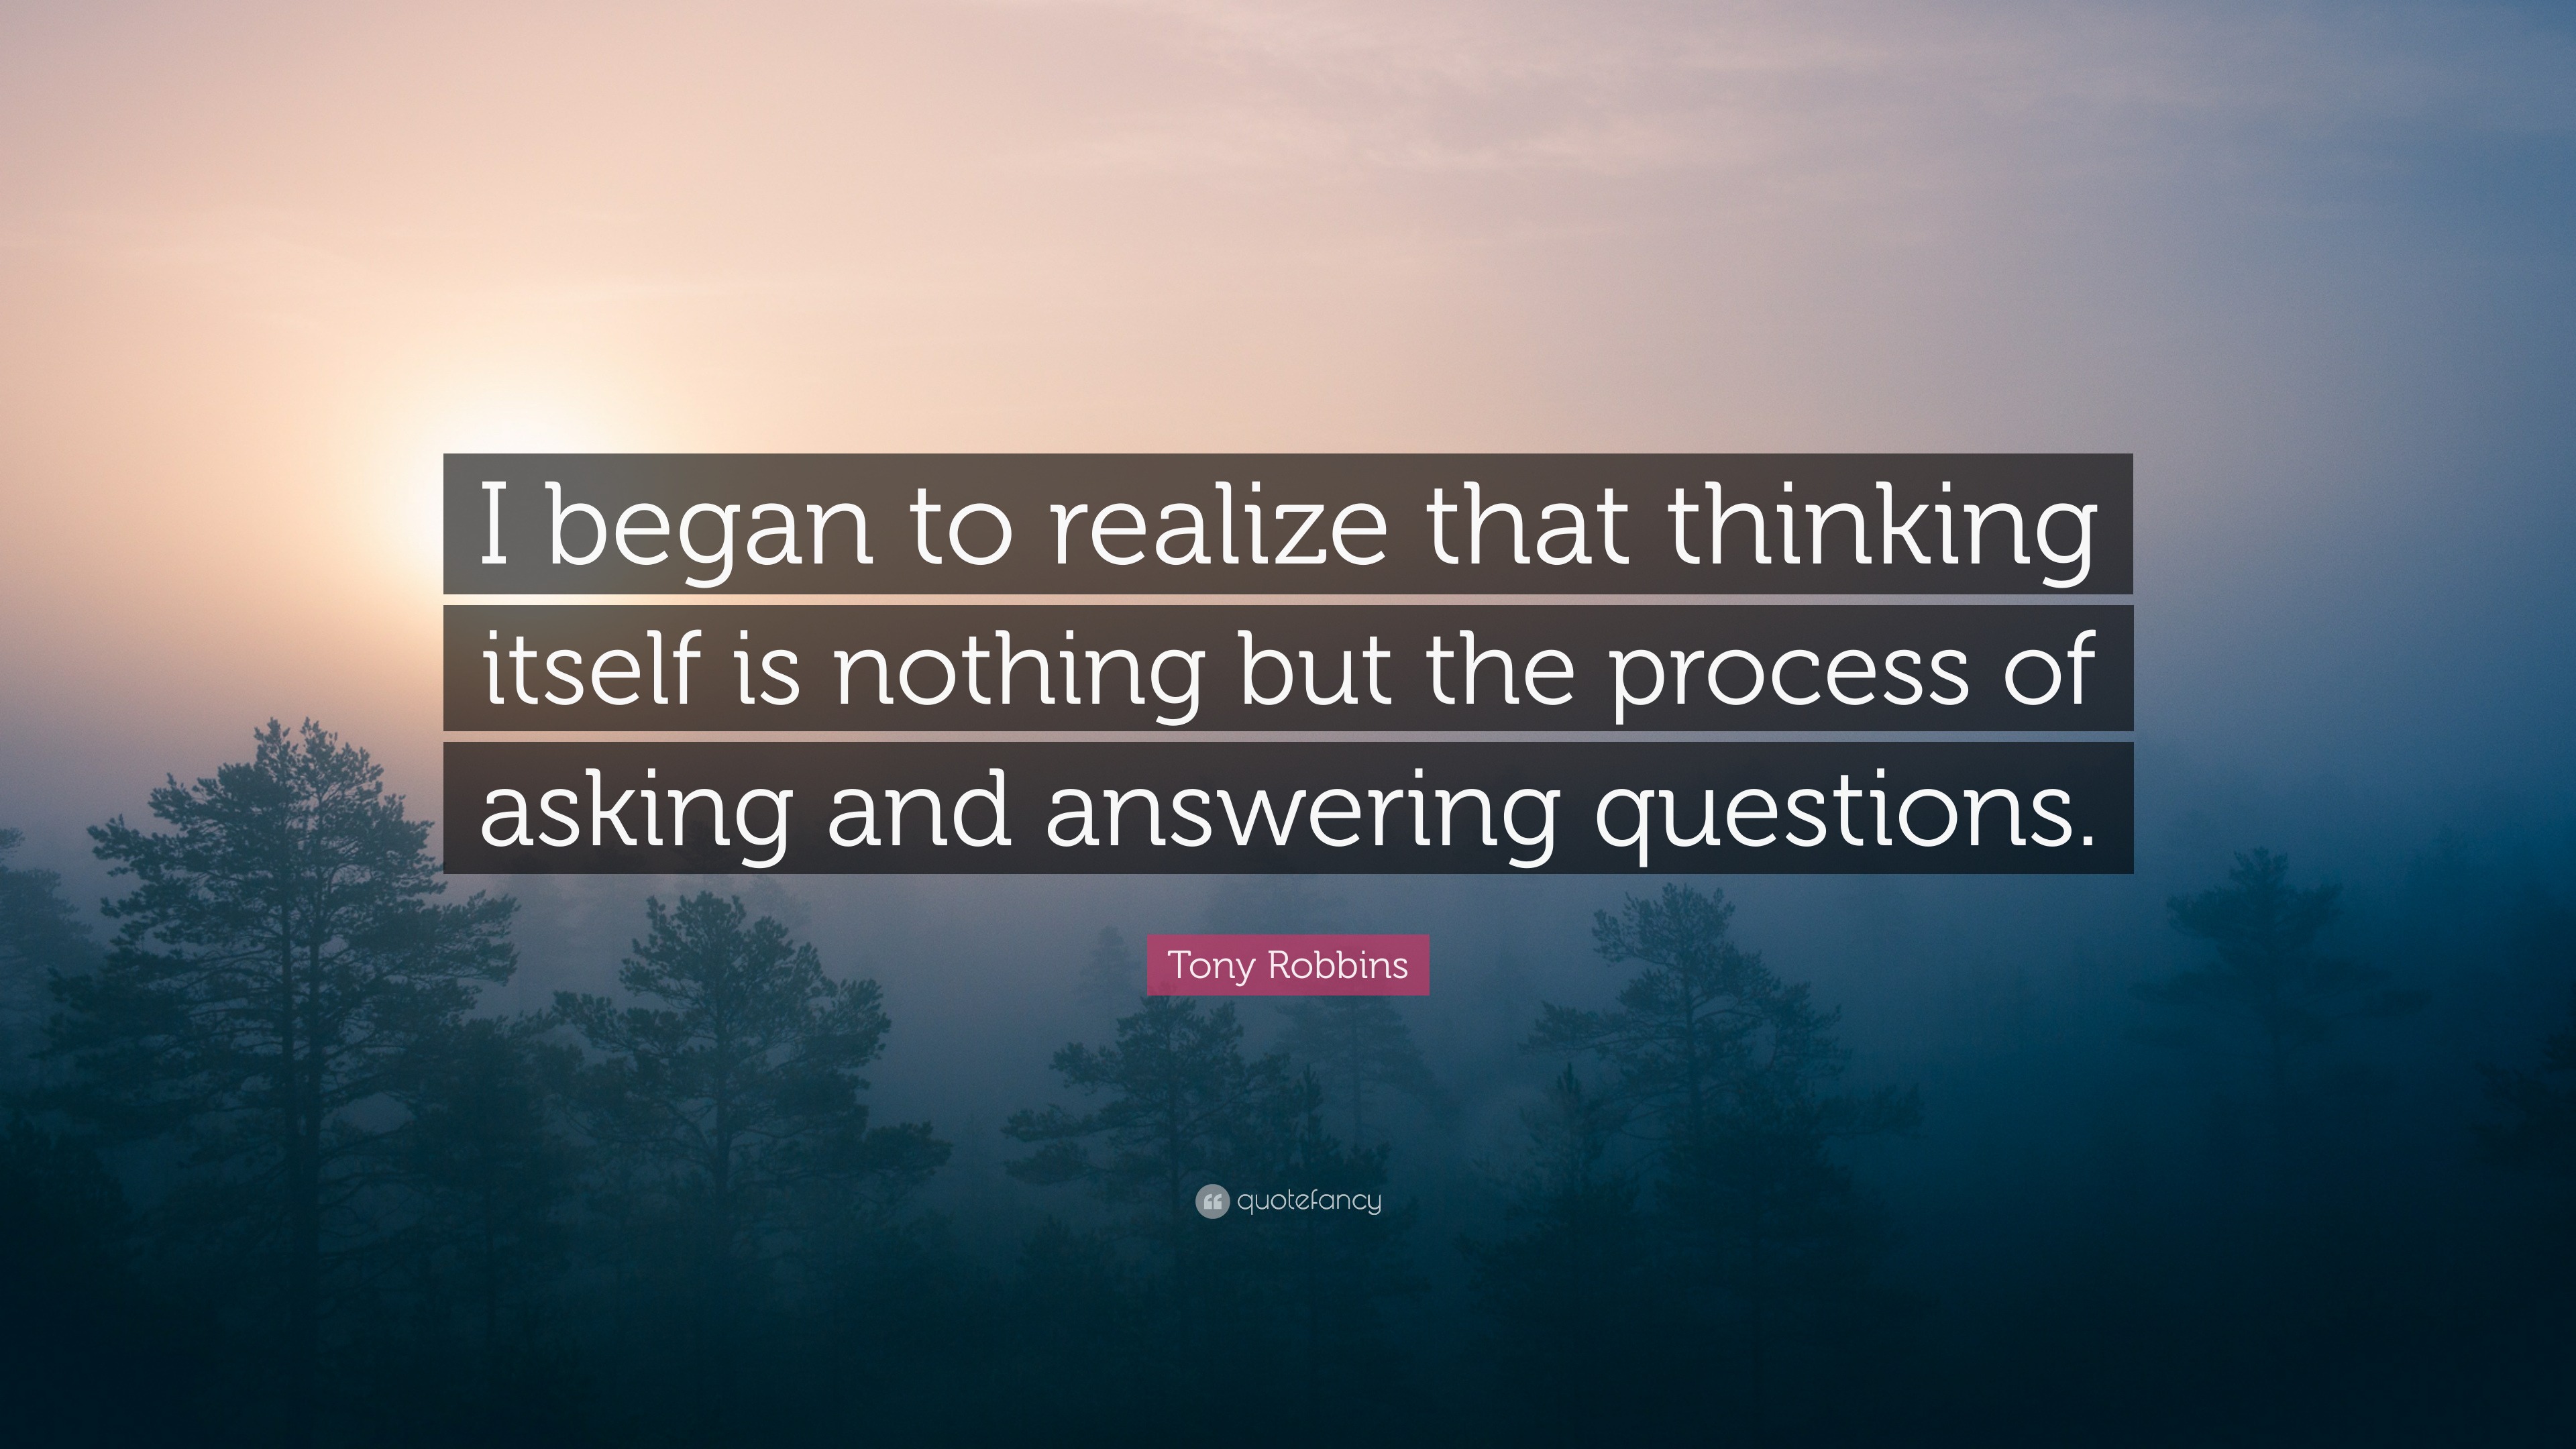 Tony Robbins Quote: “I began to realize that thinking itself is nothing ...